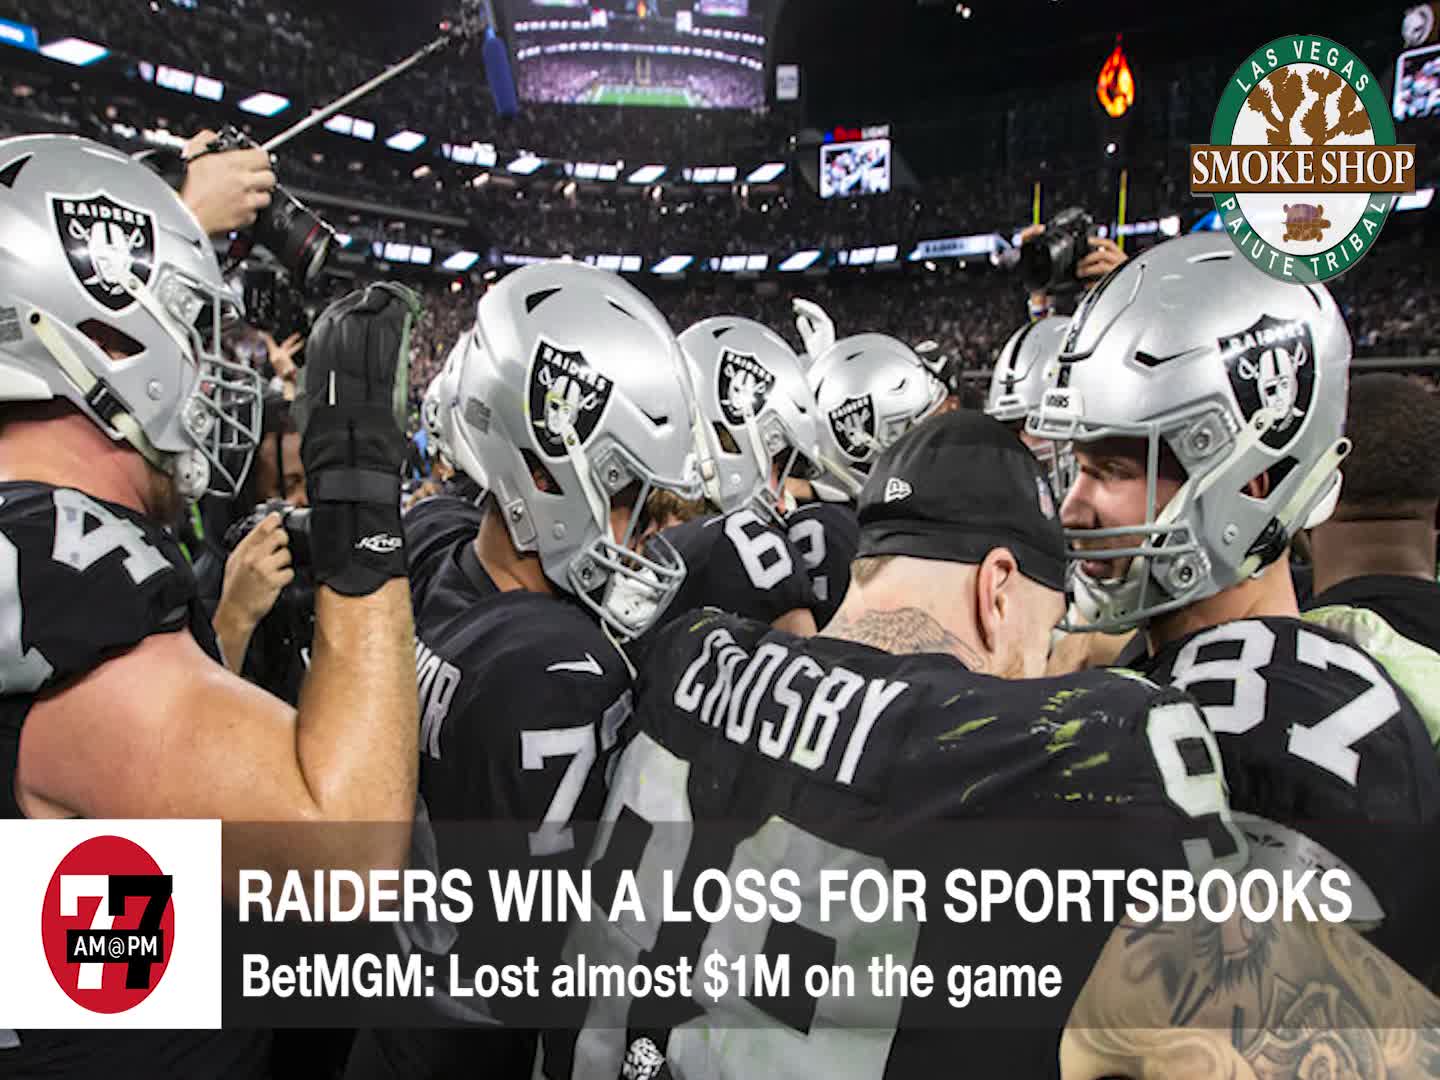 Raiders Win a Loss for Sportsbooks